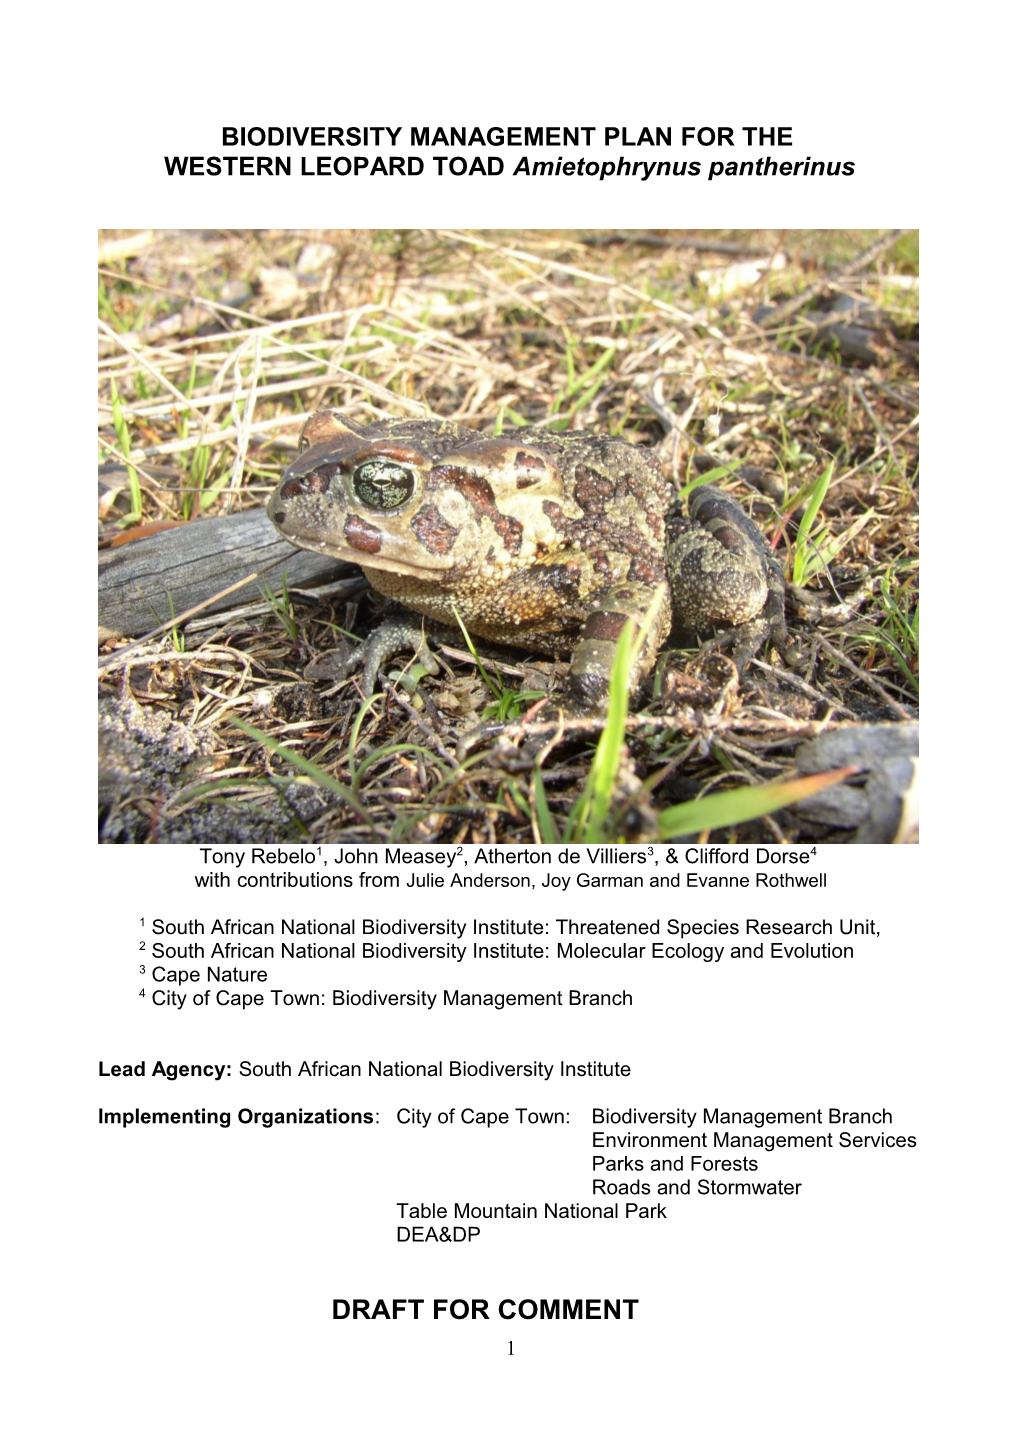 Biodiversity Management Plan for the Leopard Toad